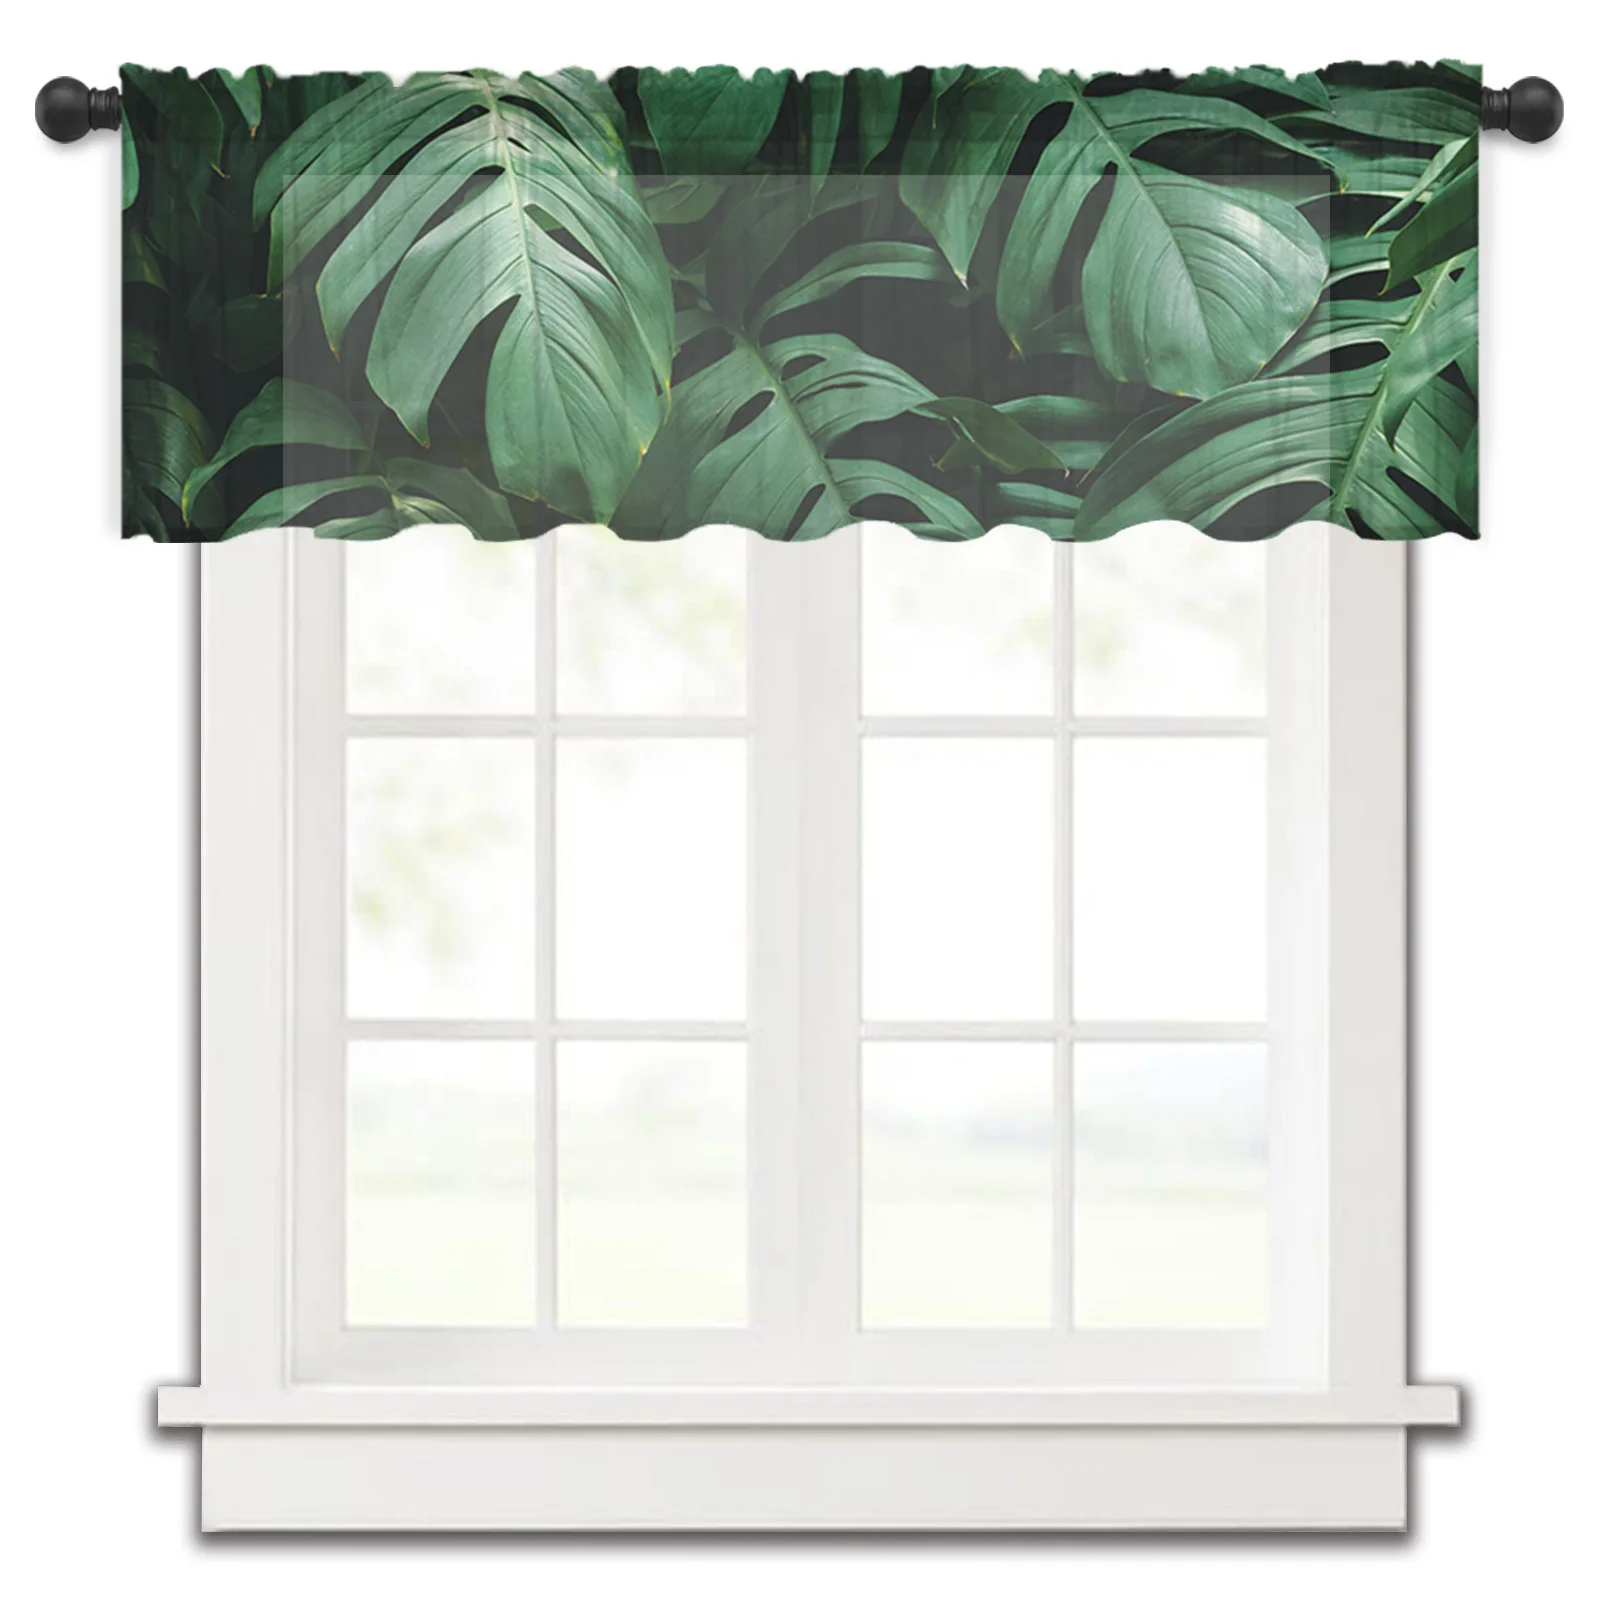 

Summer Tropical Palm Tree Kitchen Small Window Curtain Tulle Sheer Short Curtain Bedroom Living Room Home Decor Voile Drapes